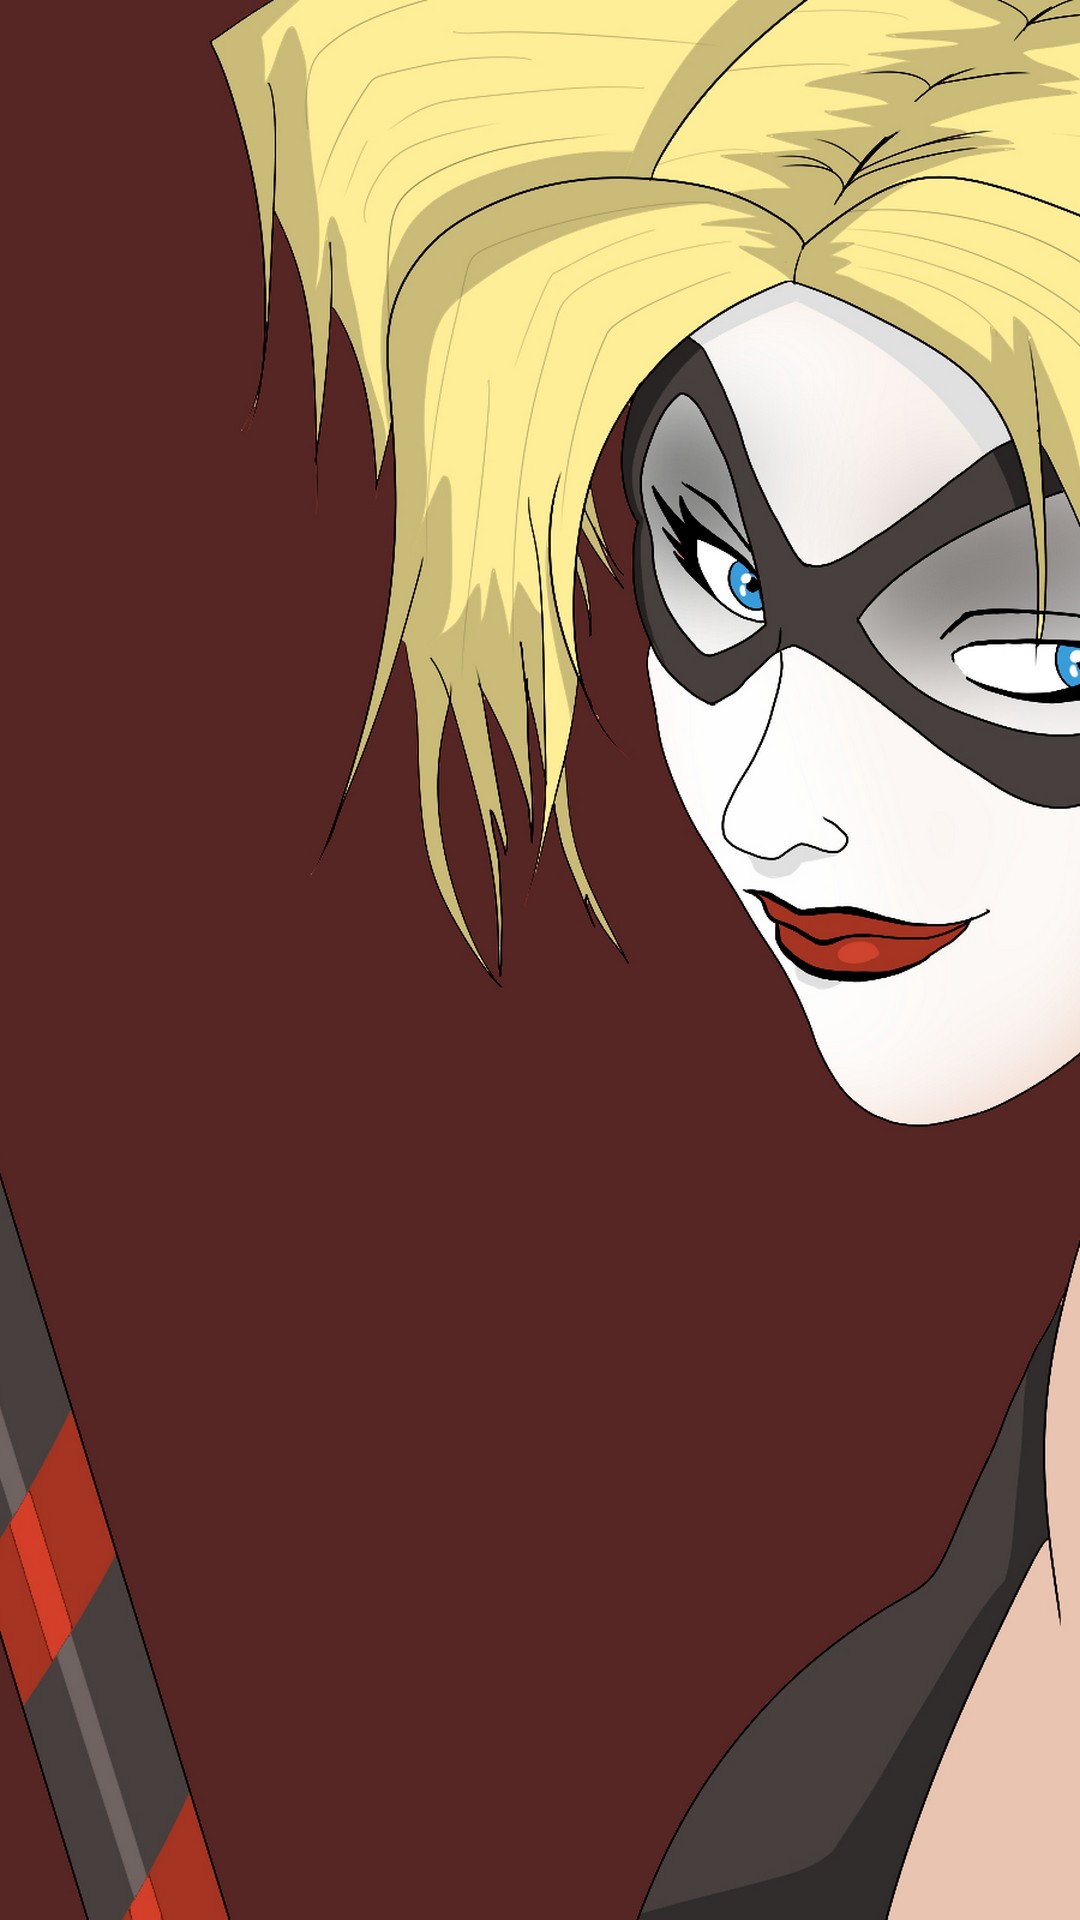 Harley Quinn Pictures iPhone Wallpaper with image resolution 1080x1920 pixel. You can make this wallpaper for your iPhone 5, 6, 7, 8, X backgrounds, Mobile Screensaver, or iPad Lock Screen